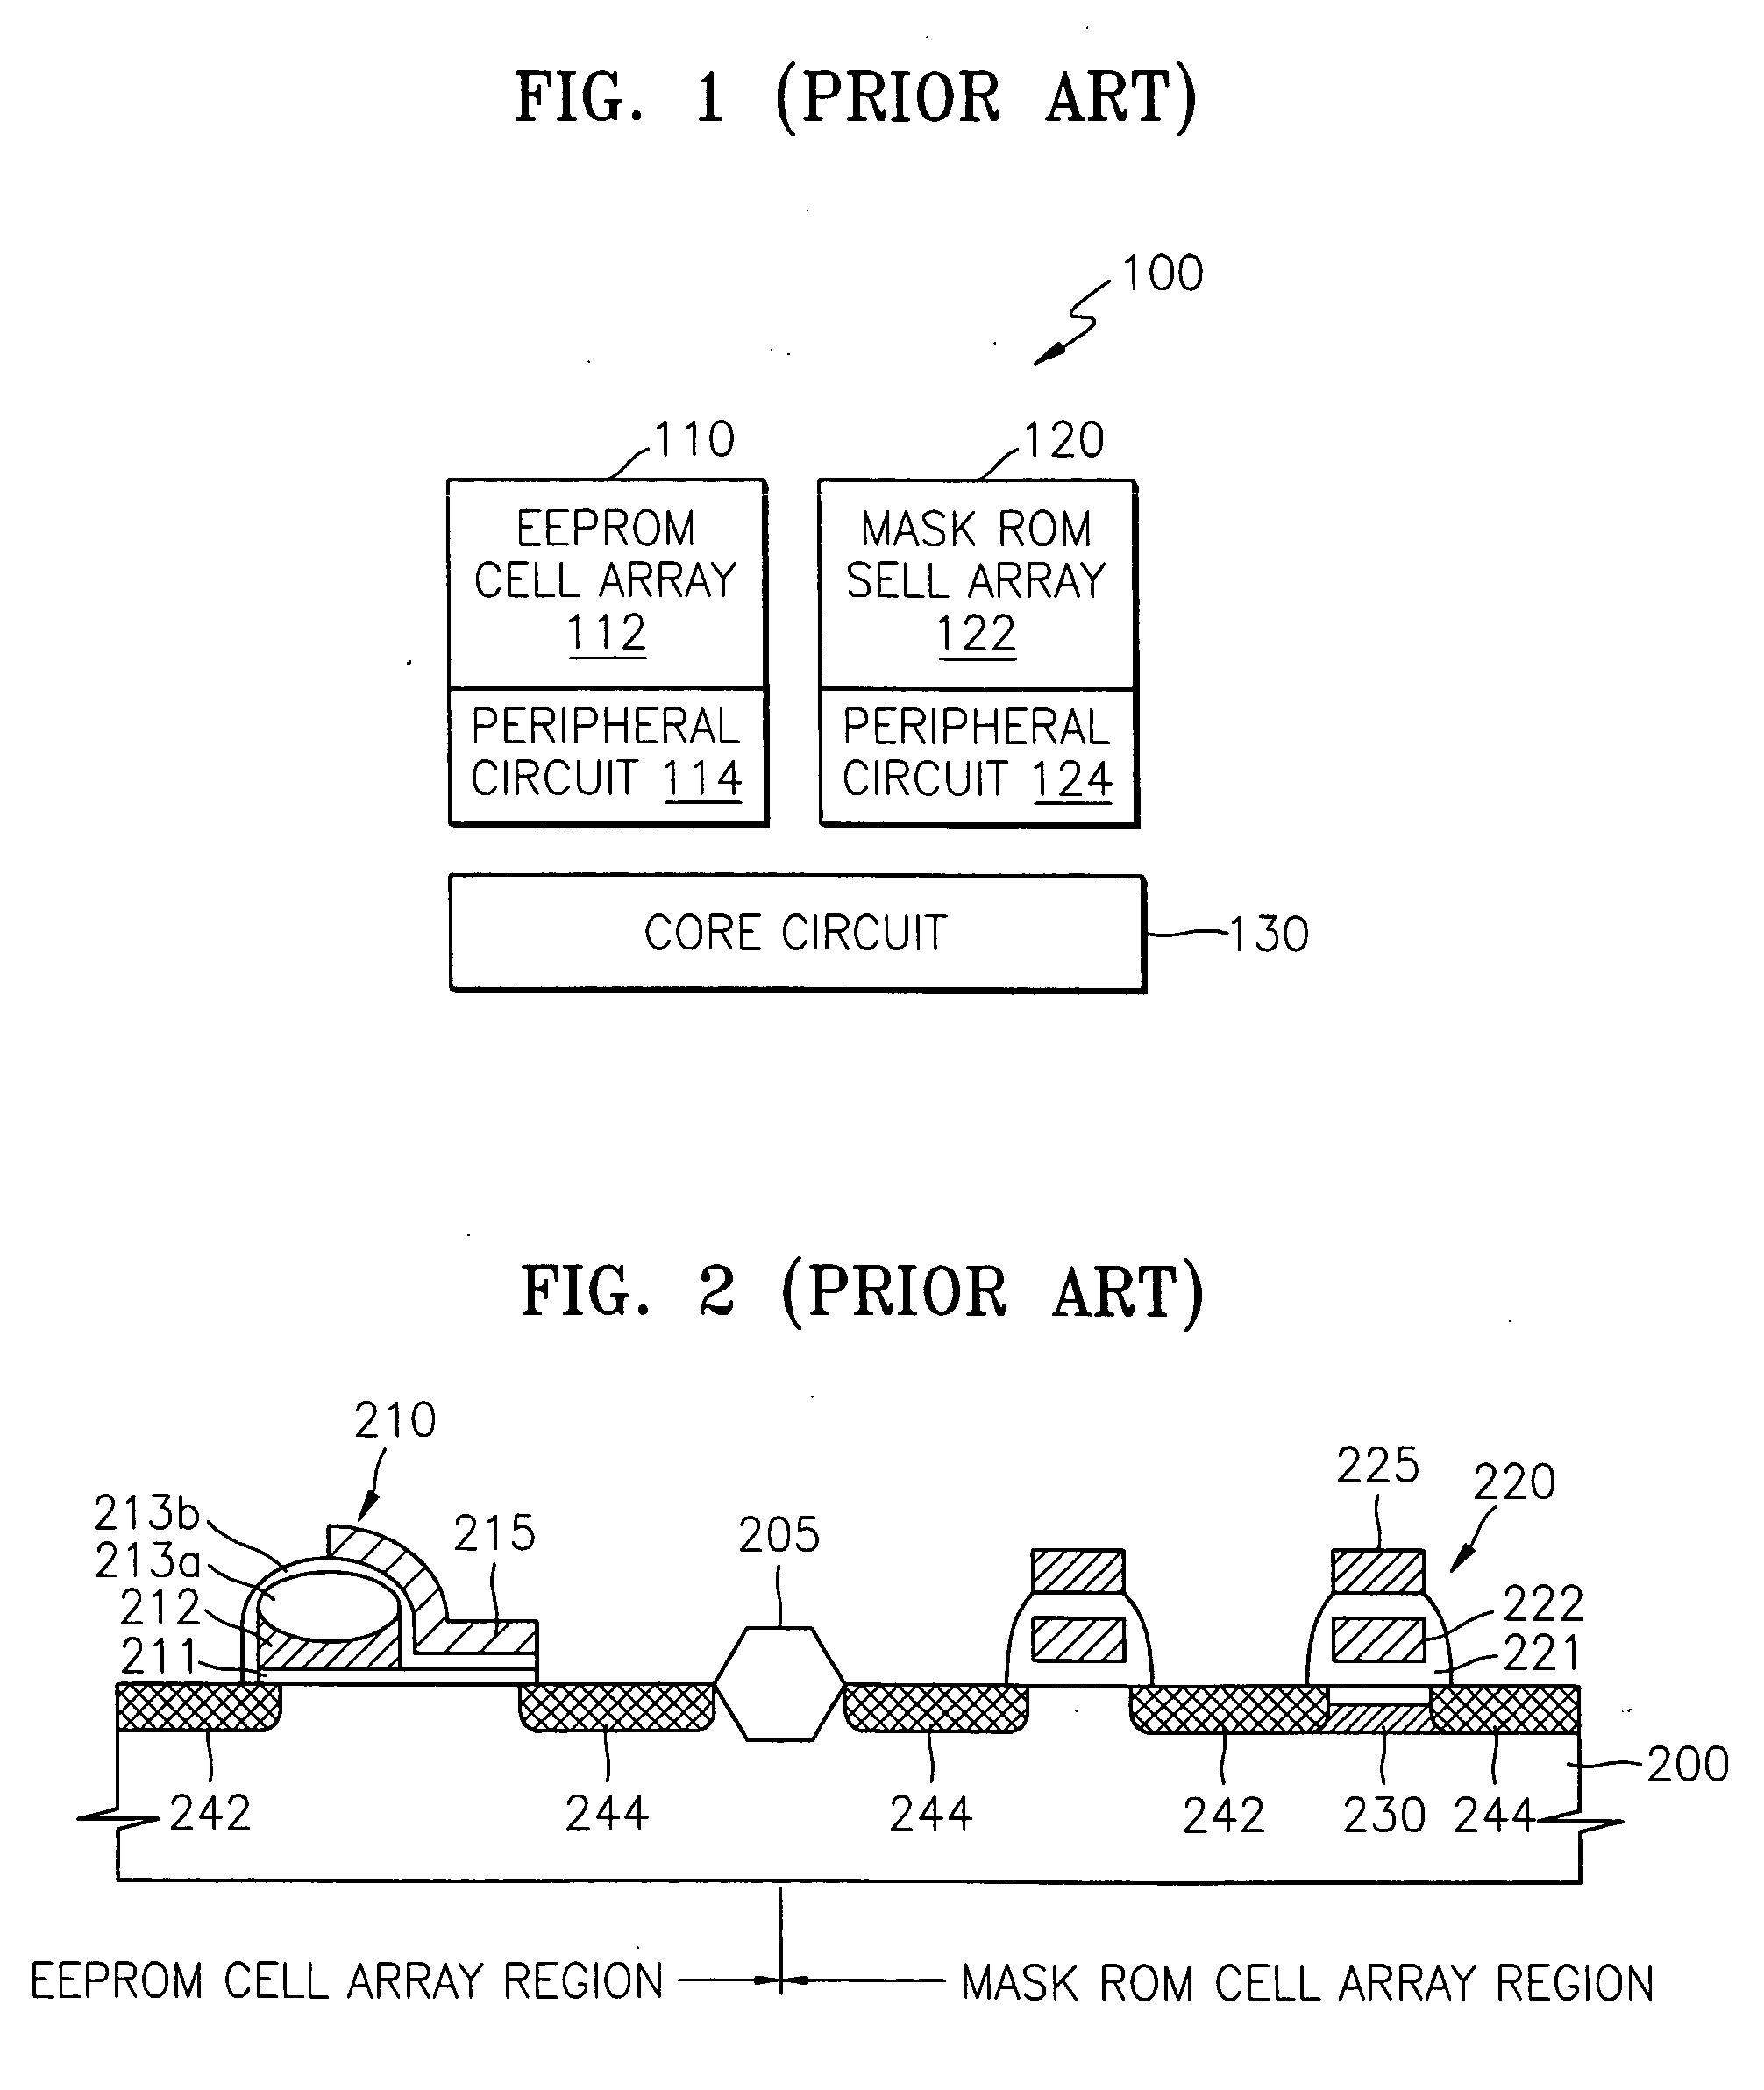 Semiconductor memory device including a flash memory cell array and a mask read-only memory cell array